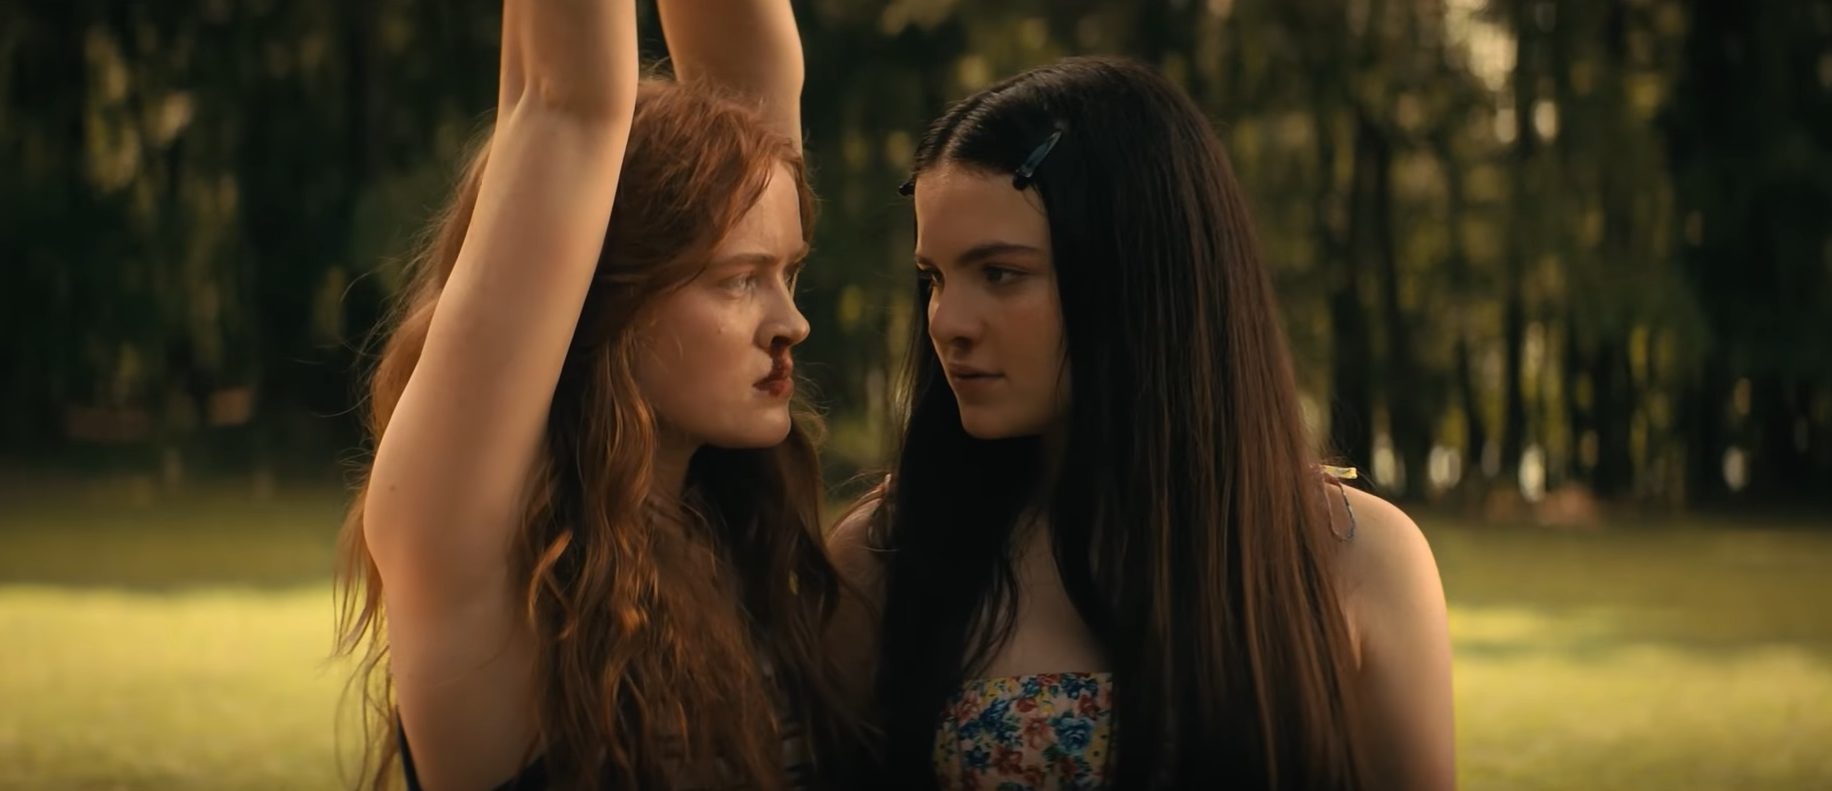 Sadie Sink Deals With Camp Bullies in Fear Street Part 2: 1978 Clip